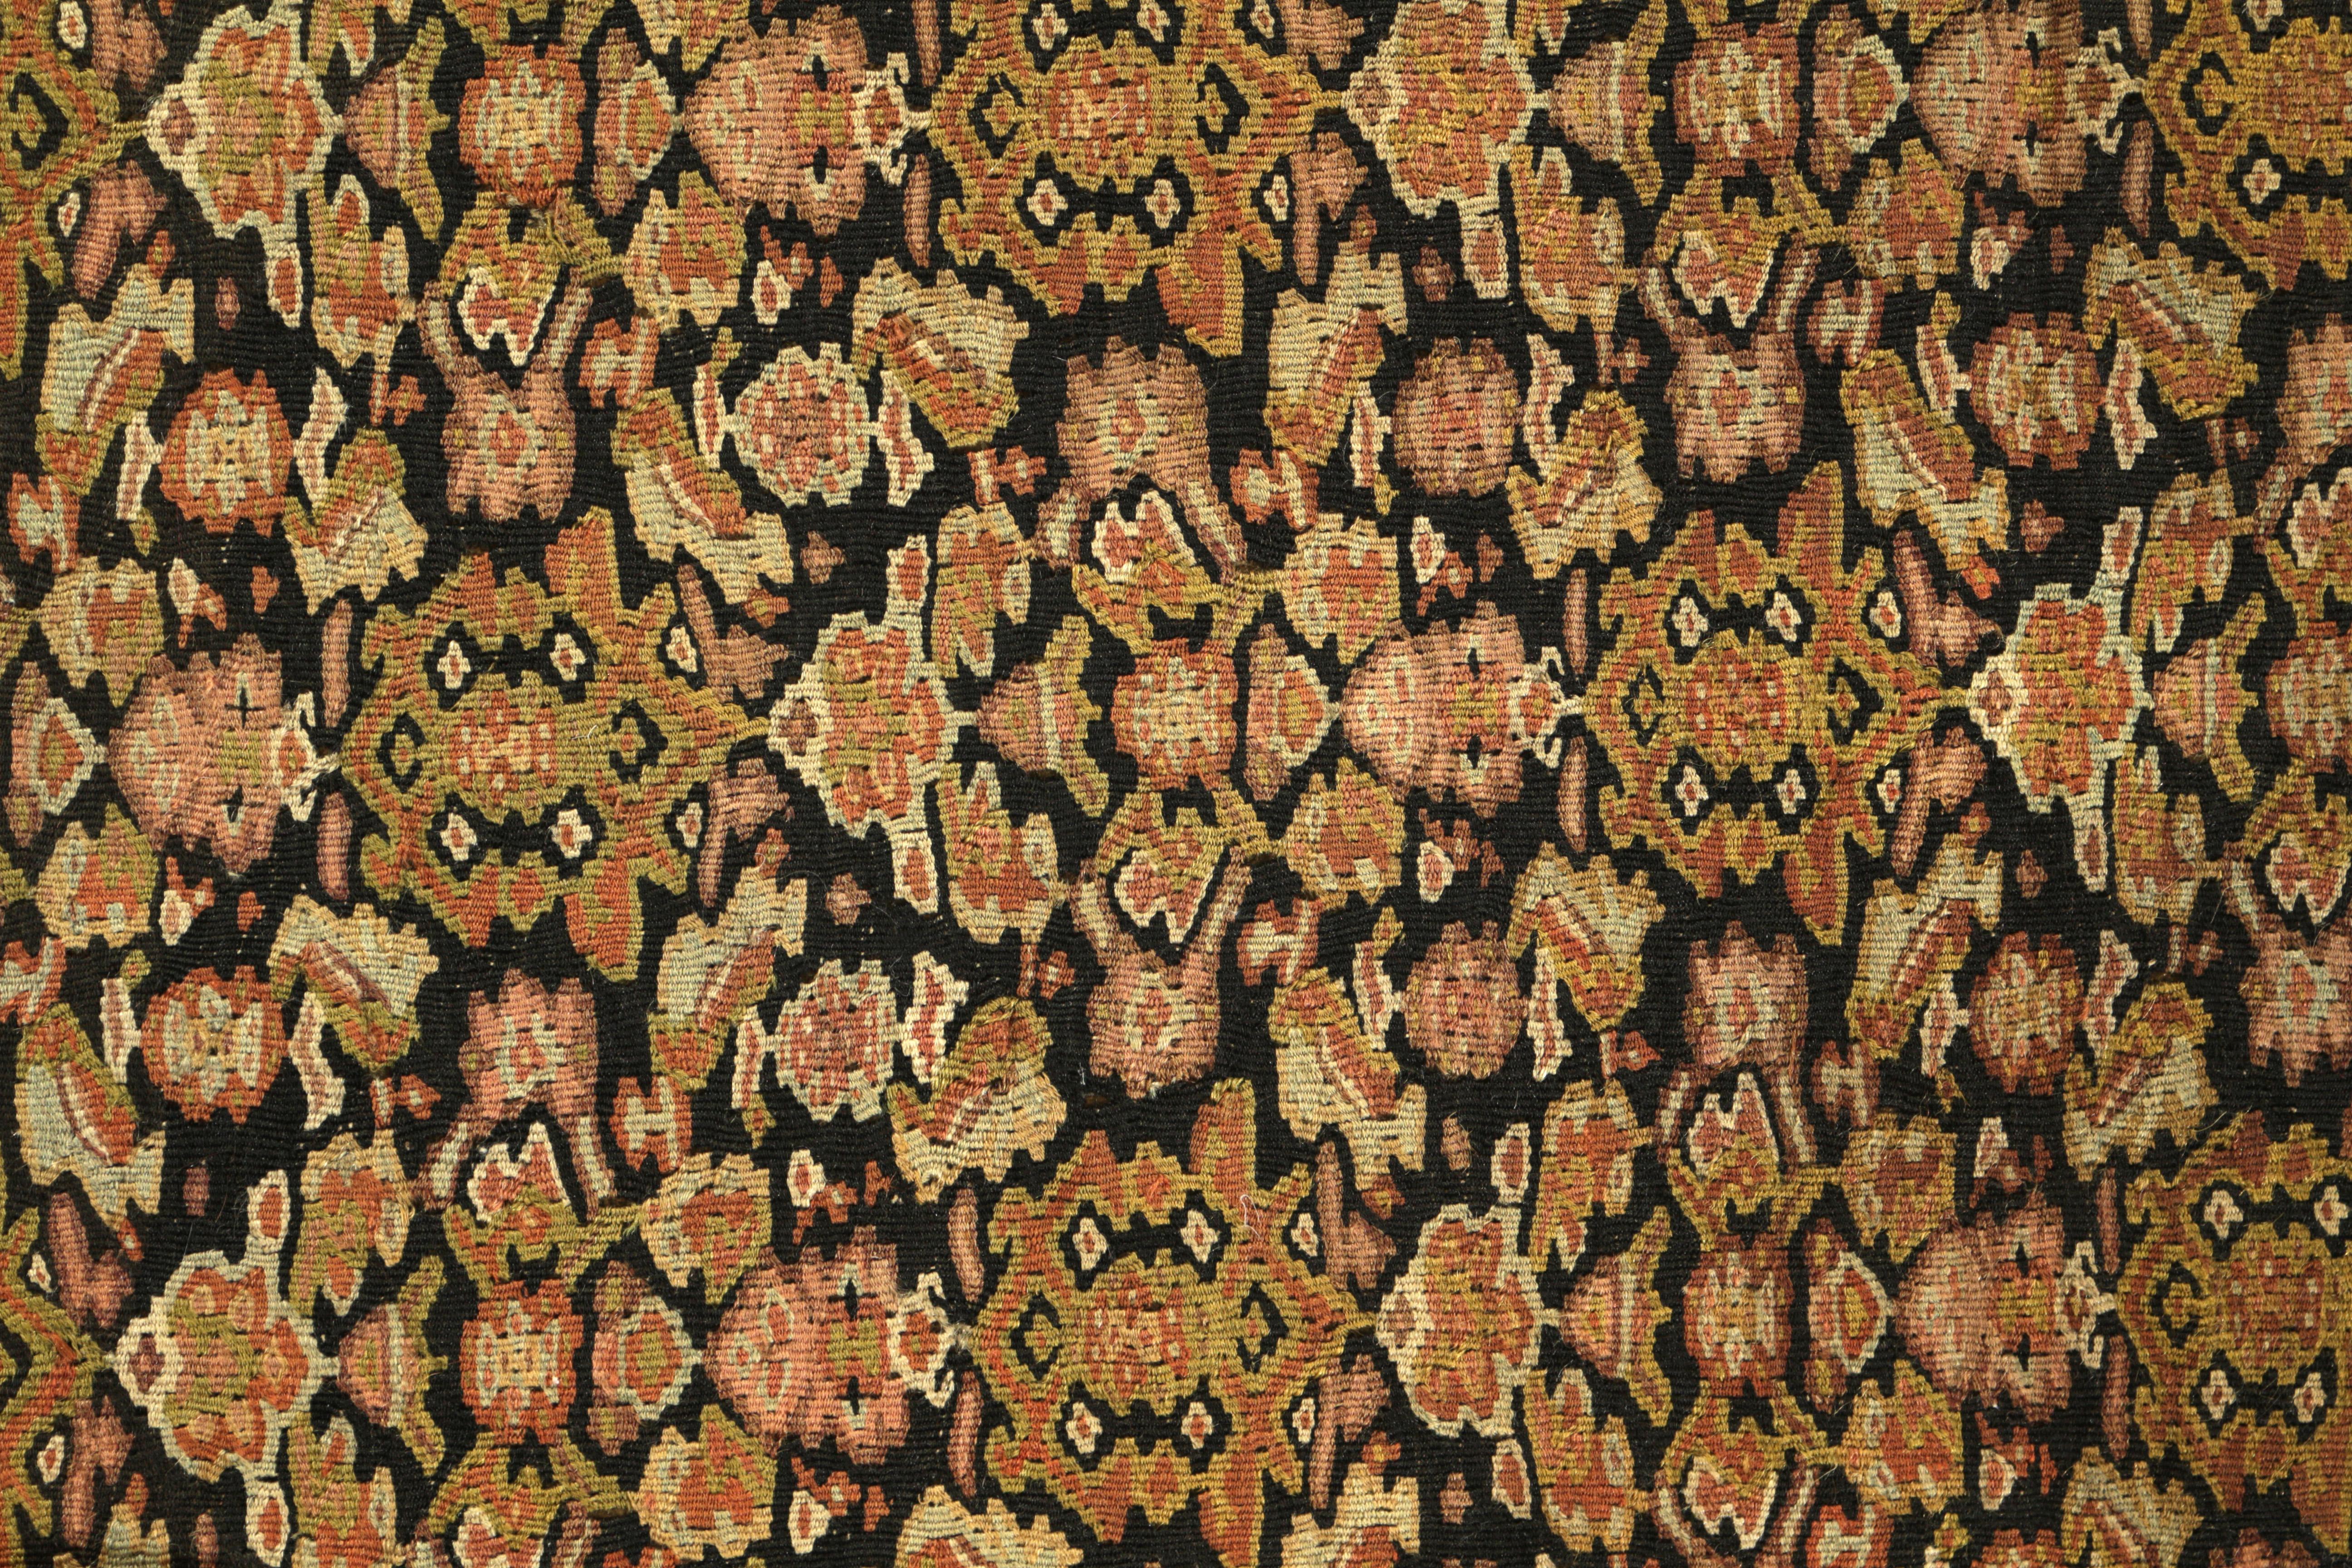 Hand-Woven Antique Senneh Kilim Beige Brown Gold Geometric All-over Pattern